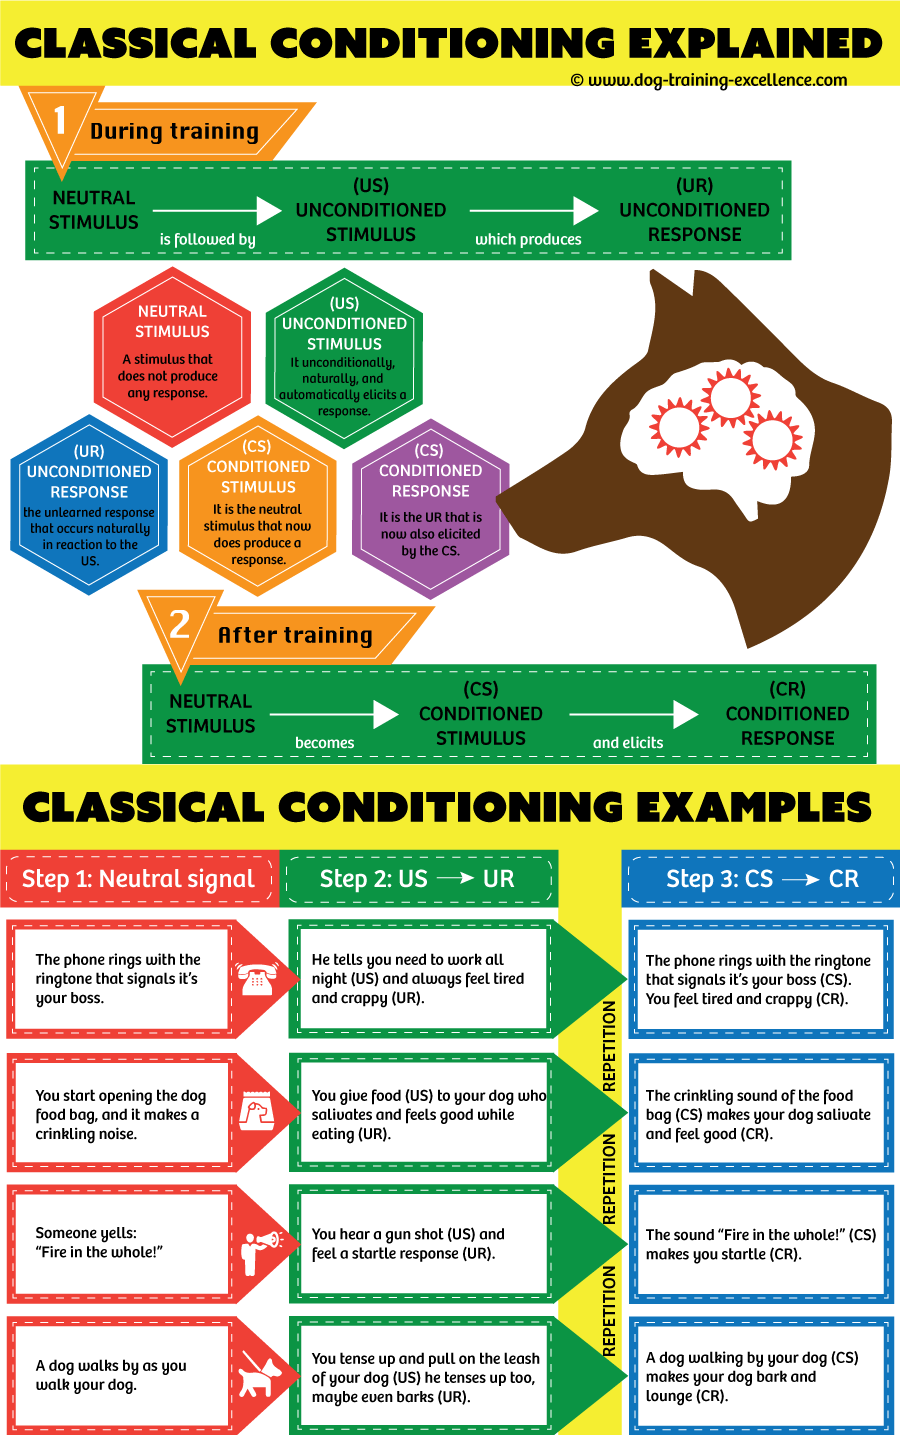 Learn classical conditioning through examples and how to apply it in dog training. 